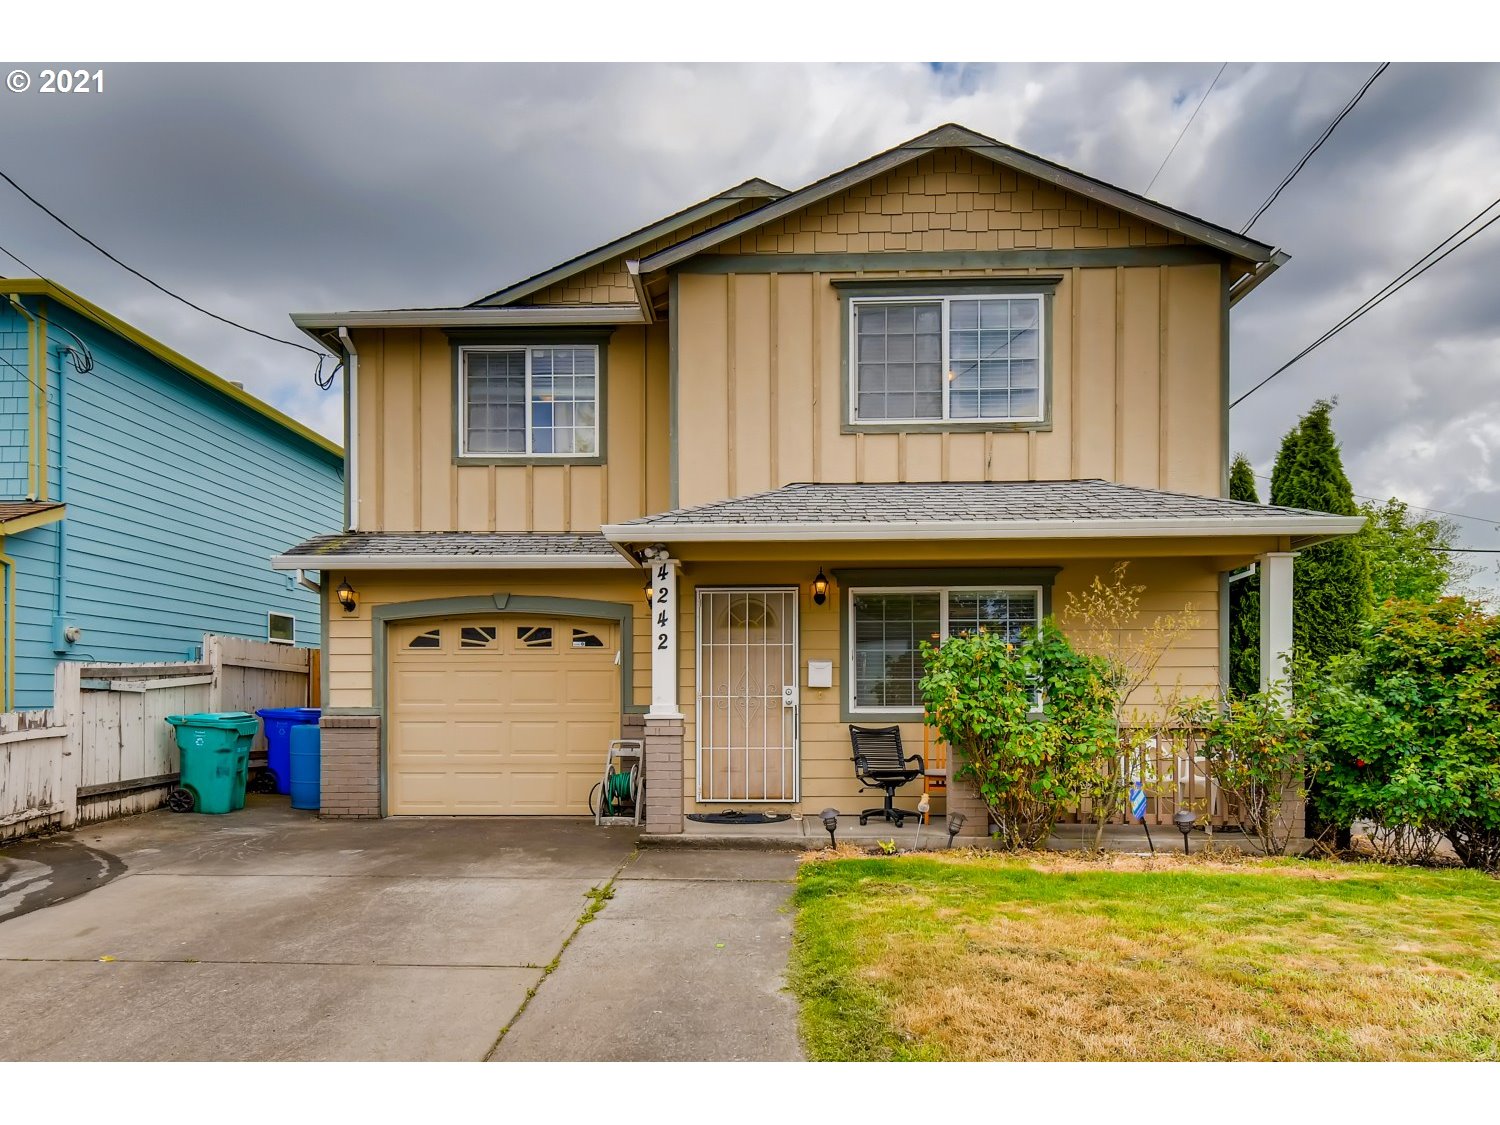 4242 SE 89TH AVE (1 of 19)